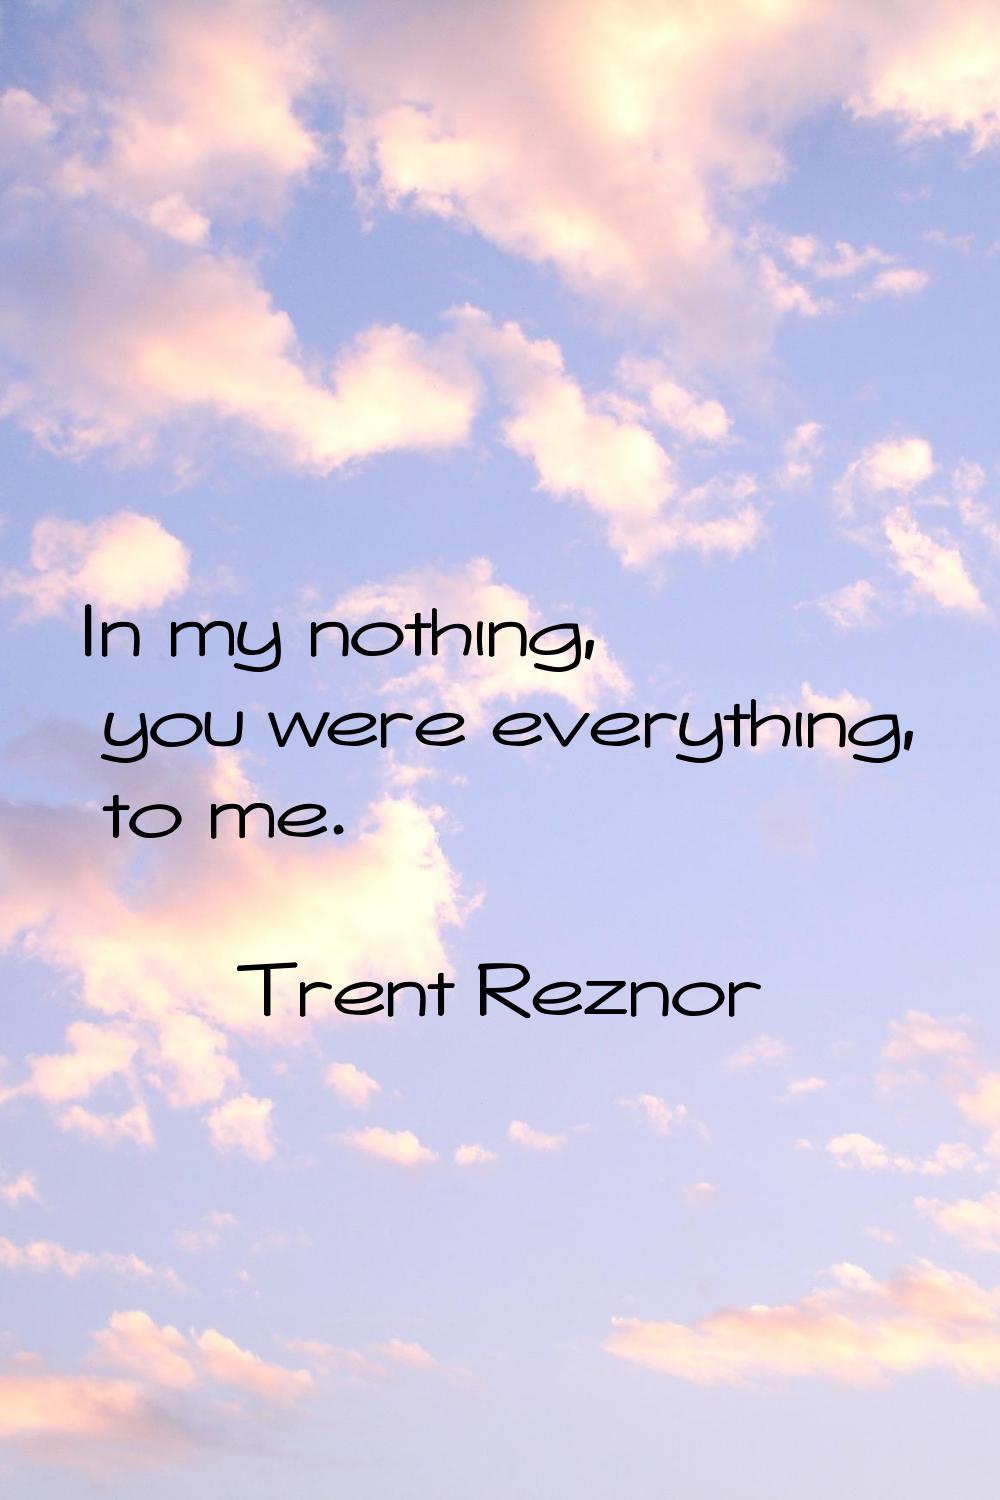 In my nothing, you were everything, to me.